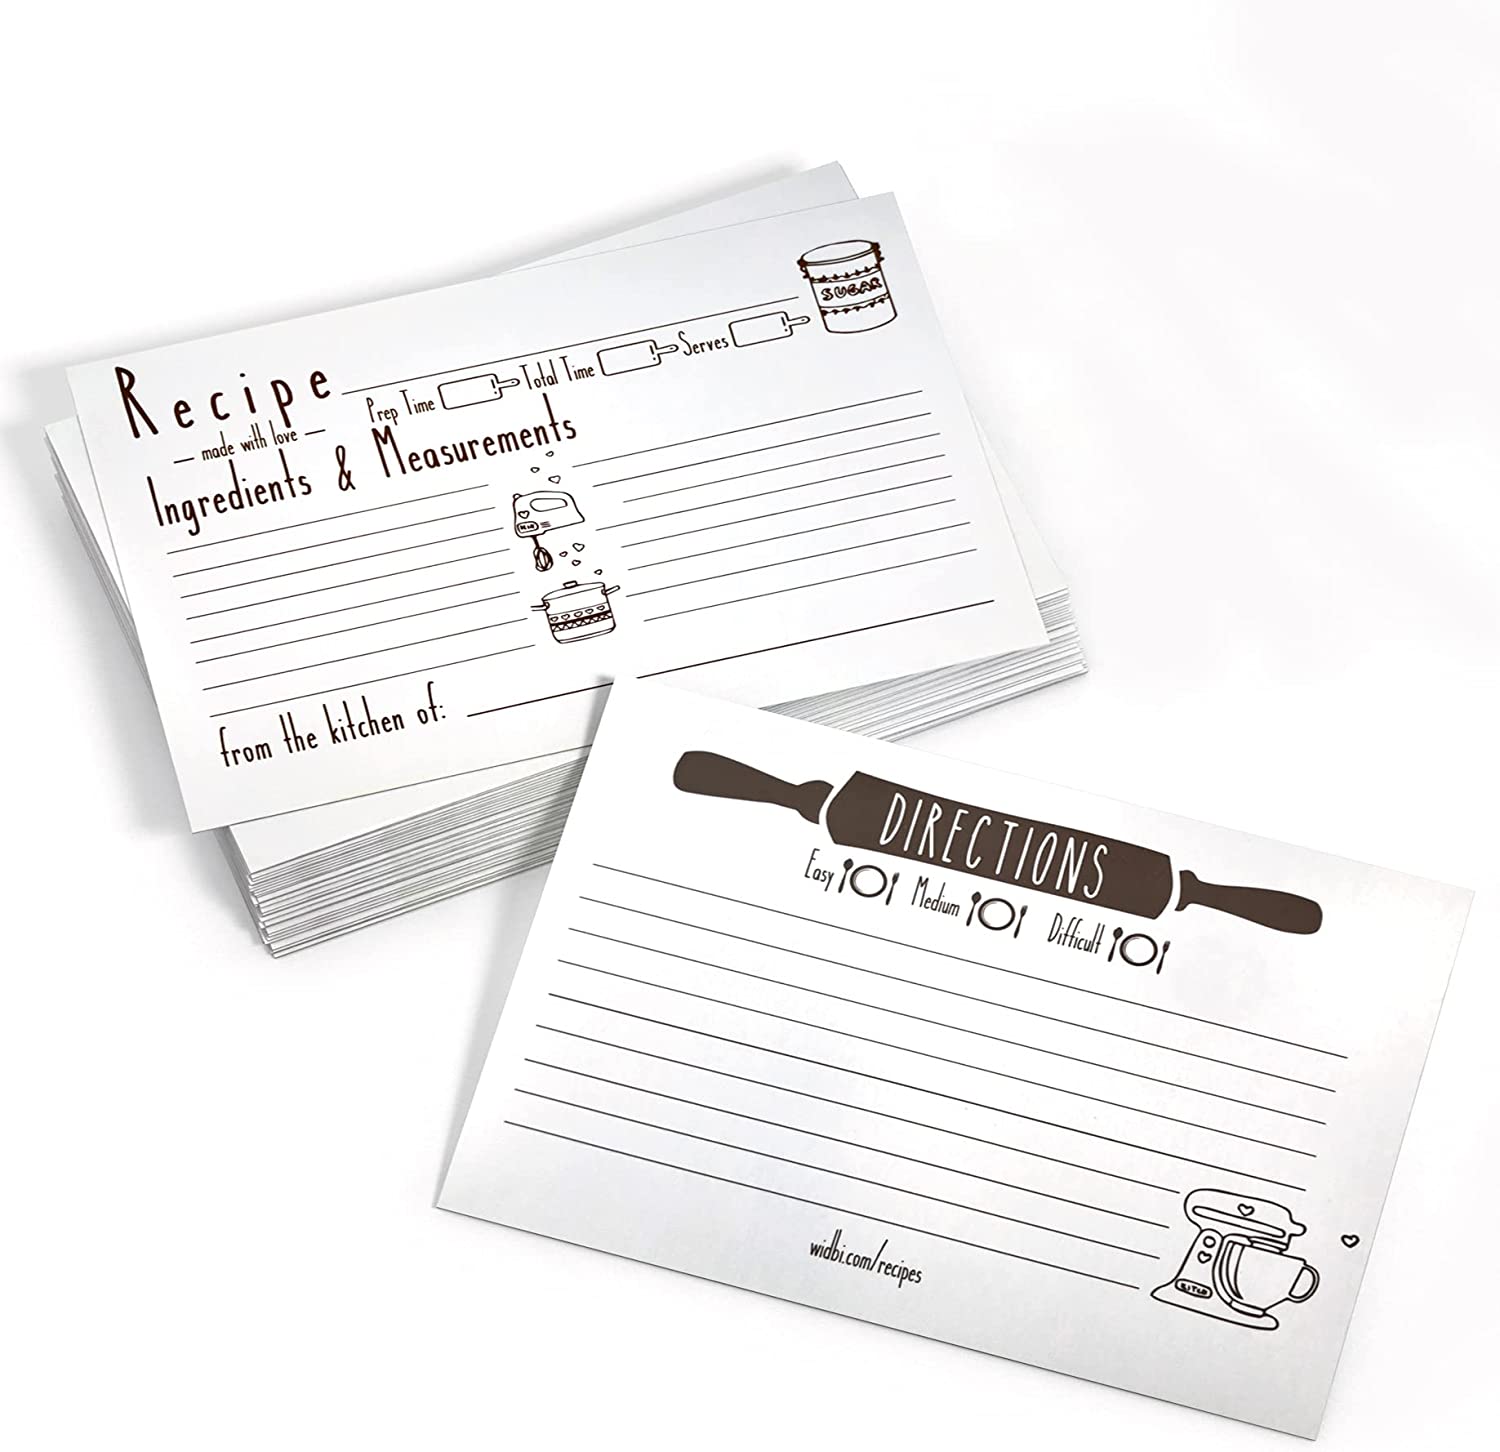 White Premium Thick Recipe Cards 4x6 Double Sided - 50 pcs